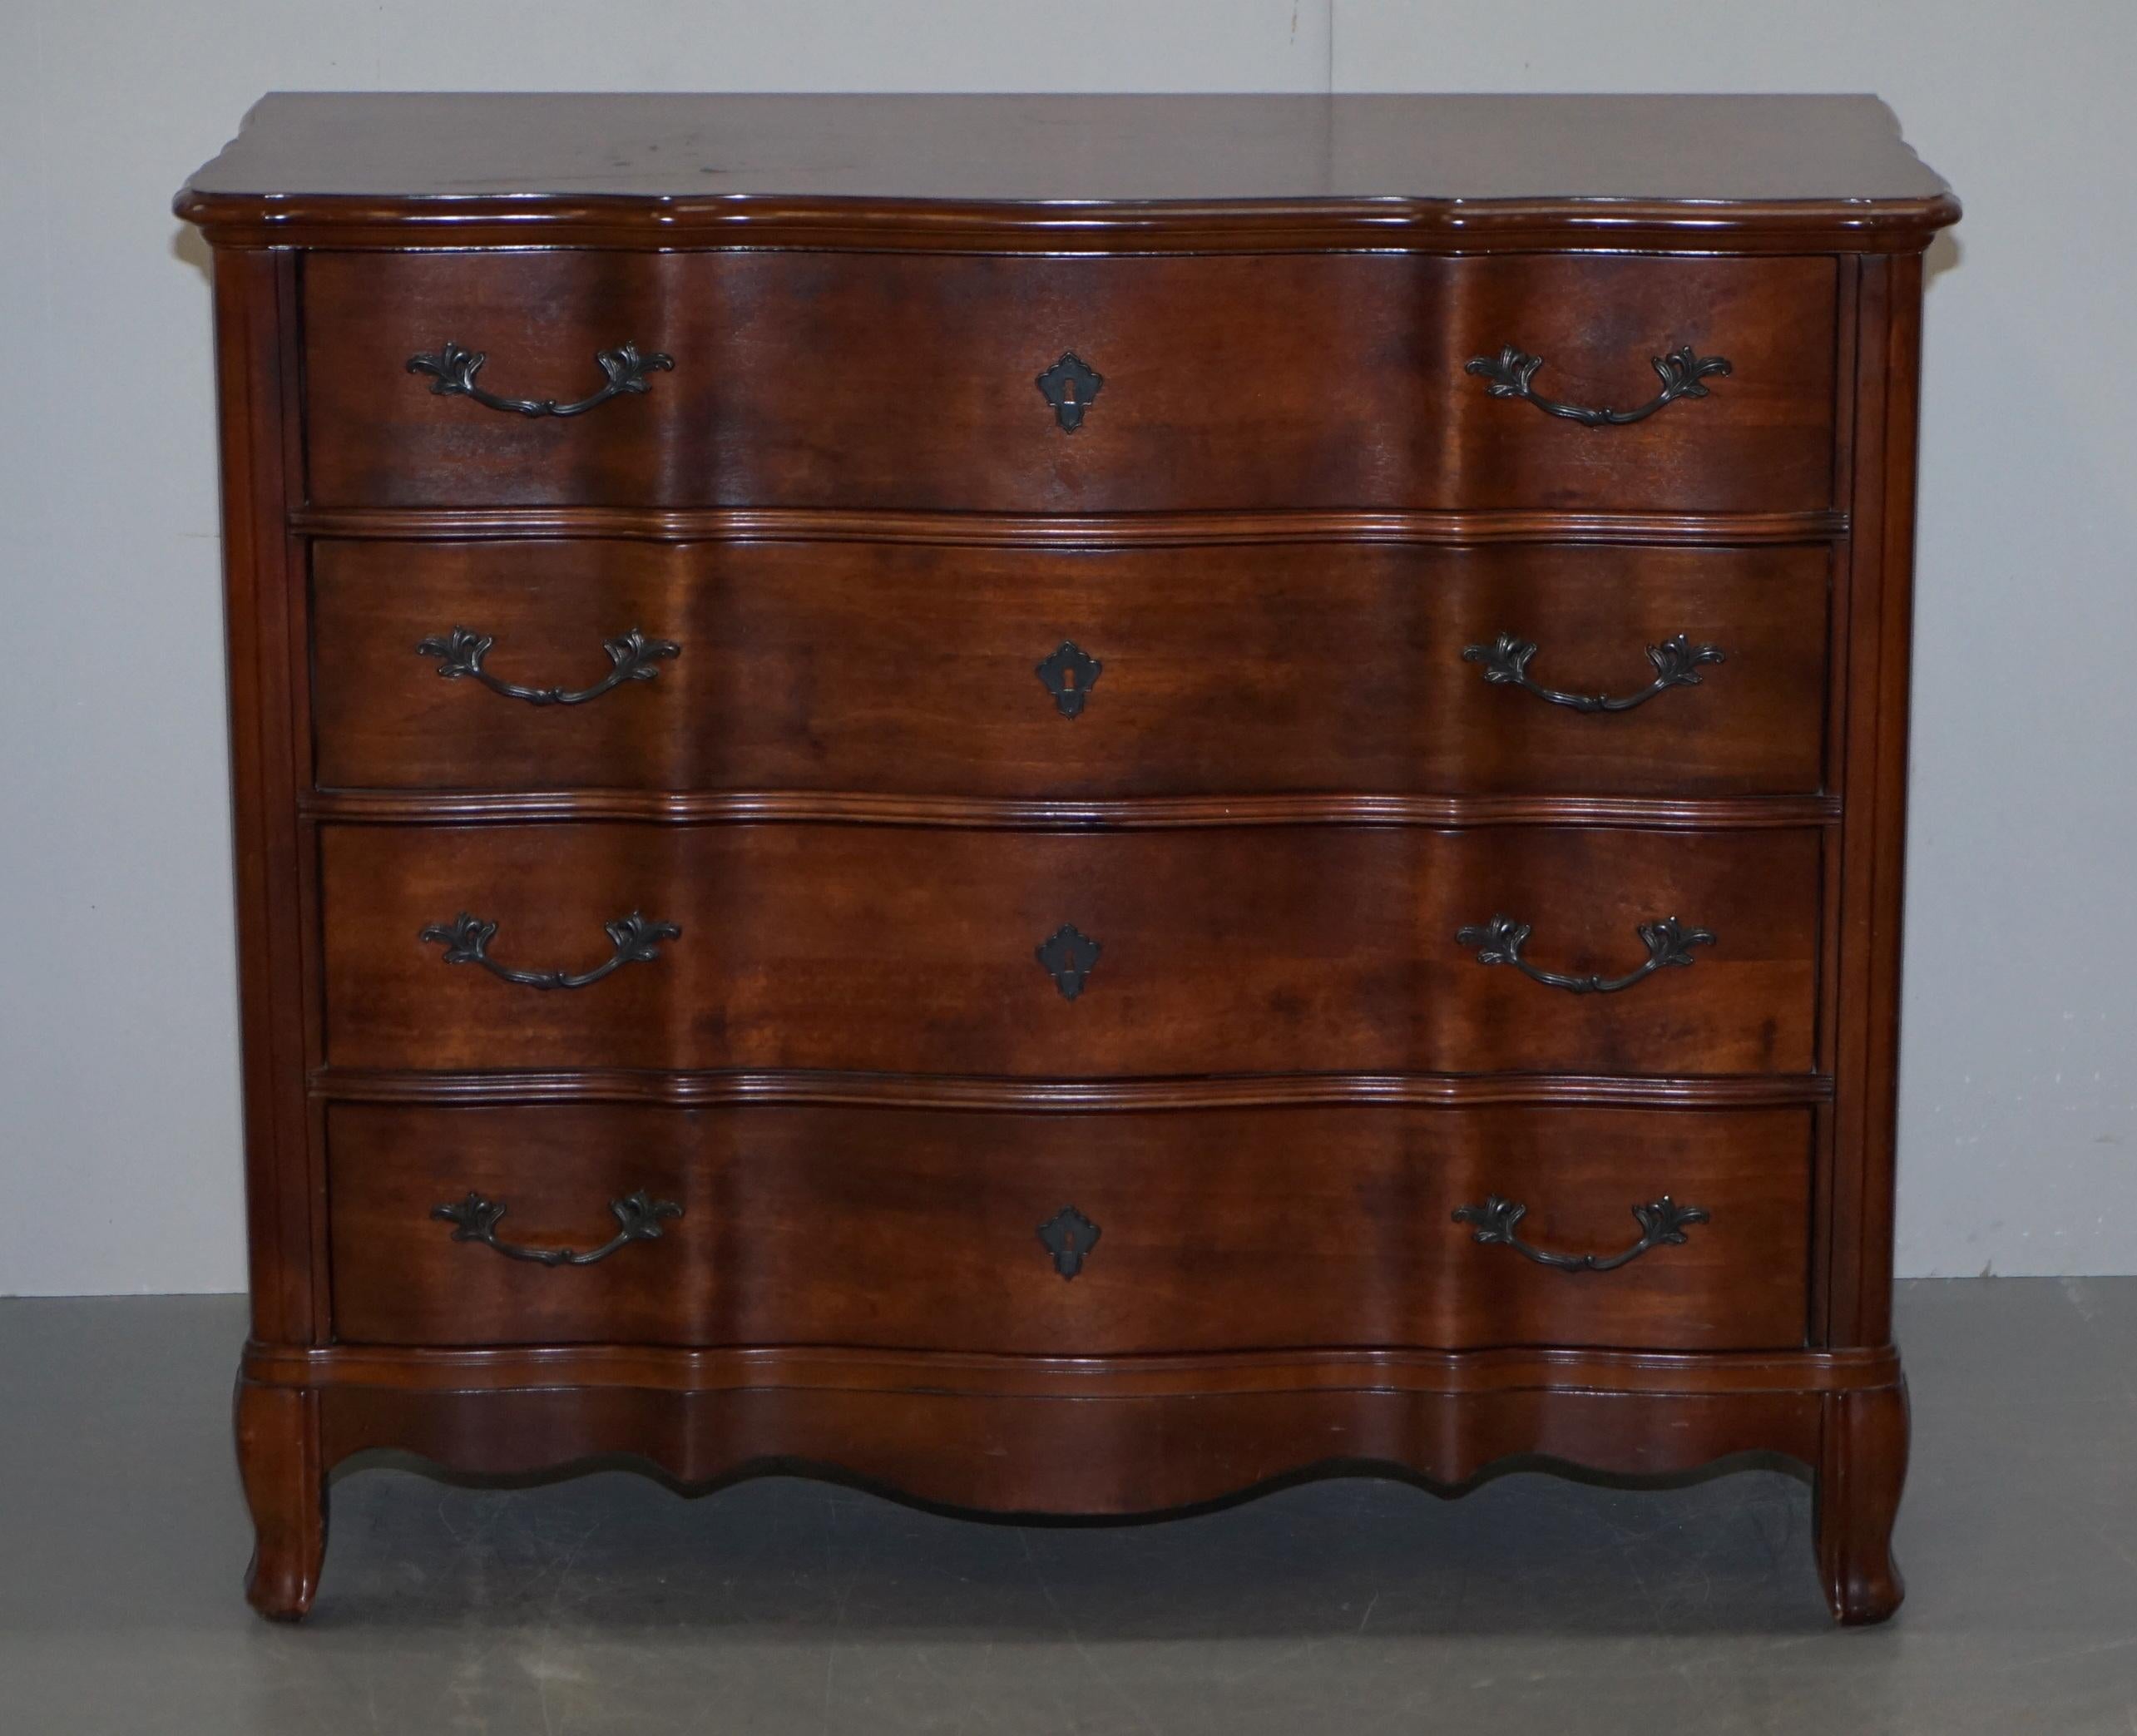 We are delighted to offer for sale this lovely Ralph Lauren American Mahogany serpentine fronted chest of drawers

A good looking and well made piece, the curves to the front really set it off nicely, the handles are Georgian style and nice and